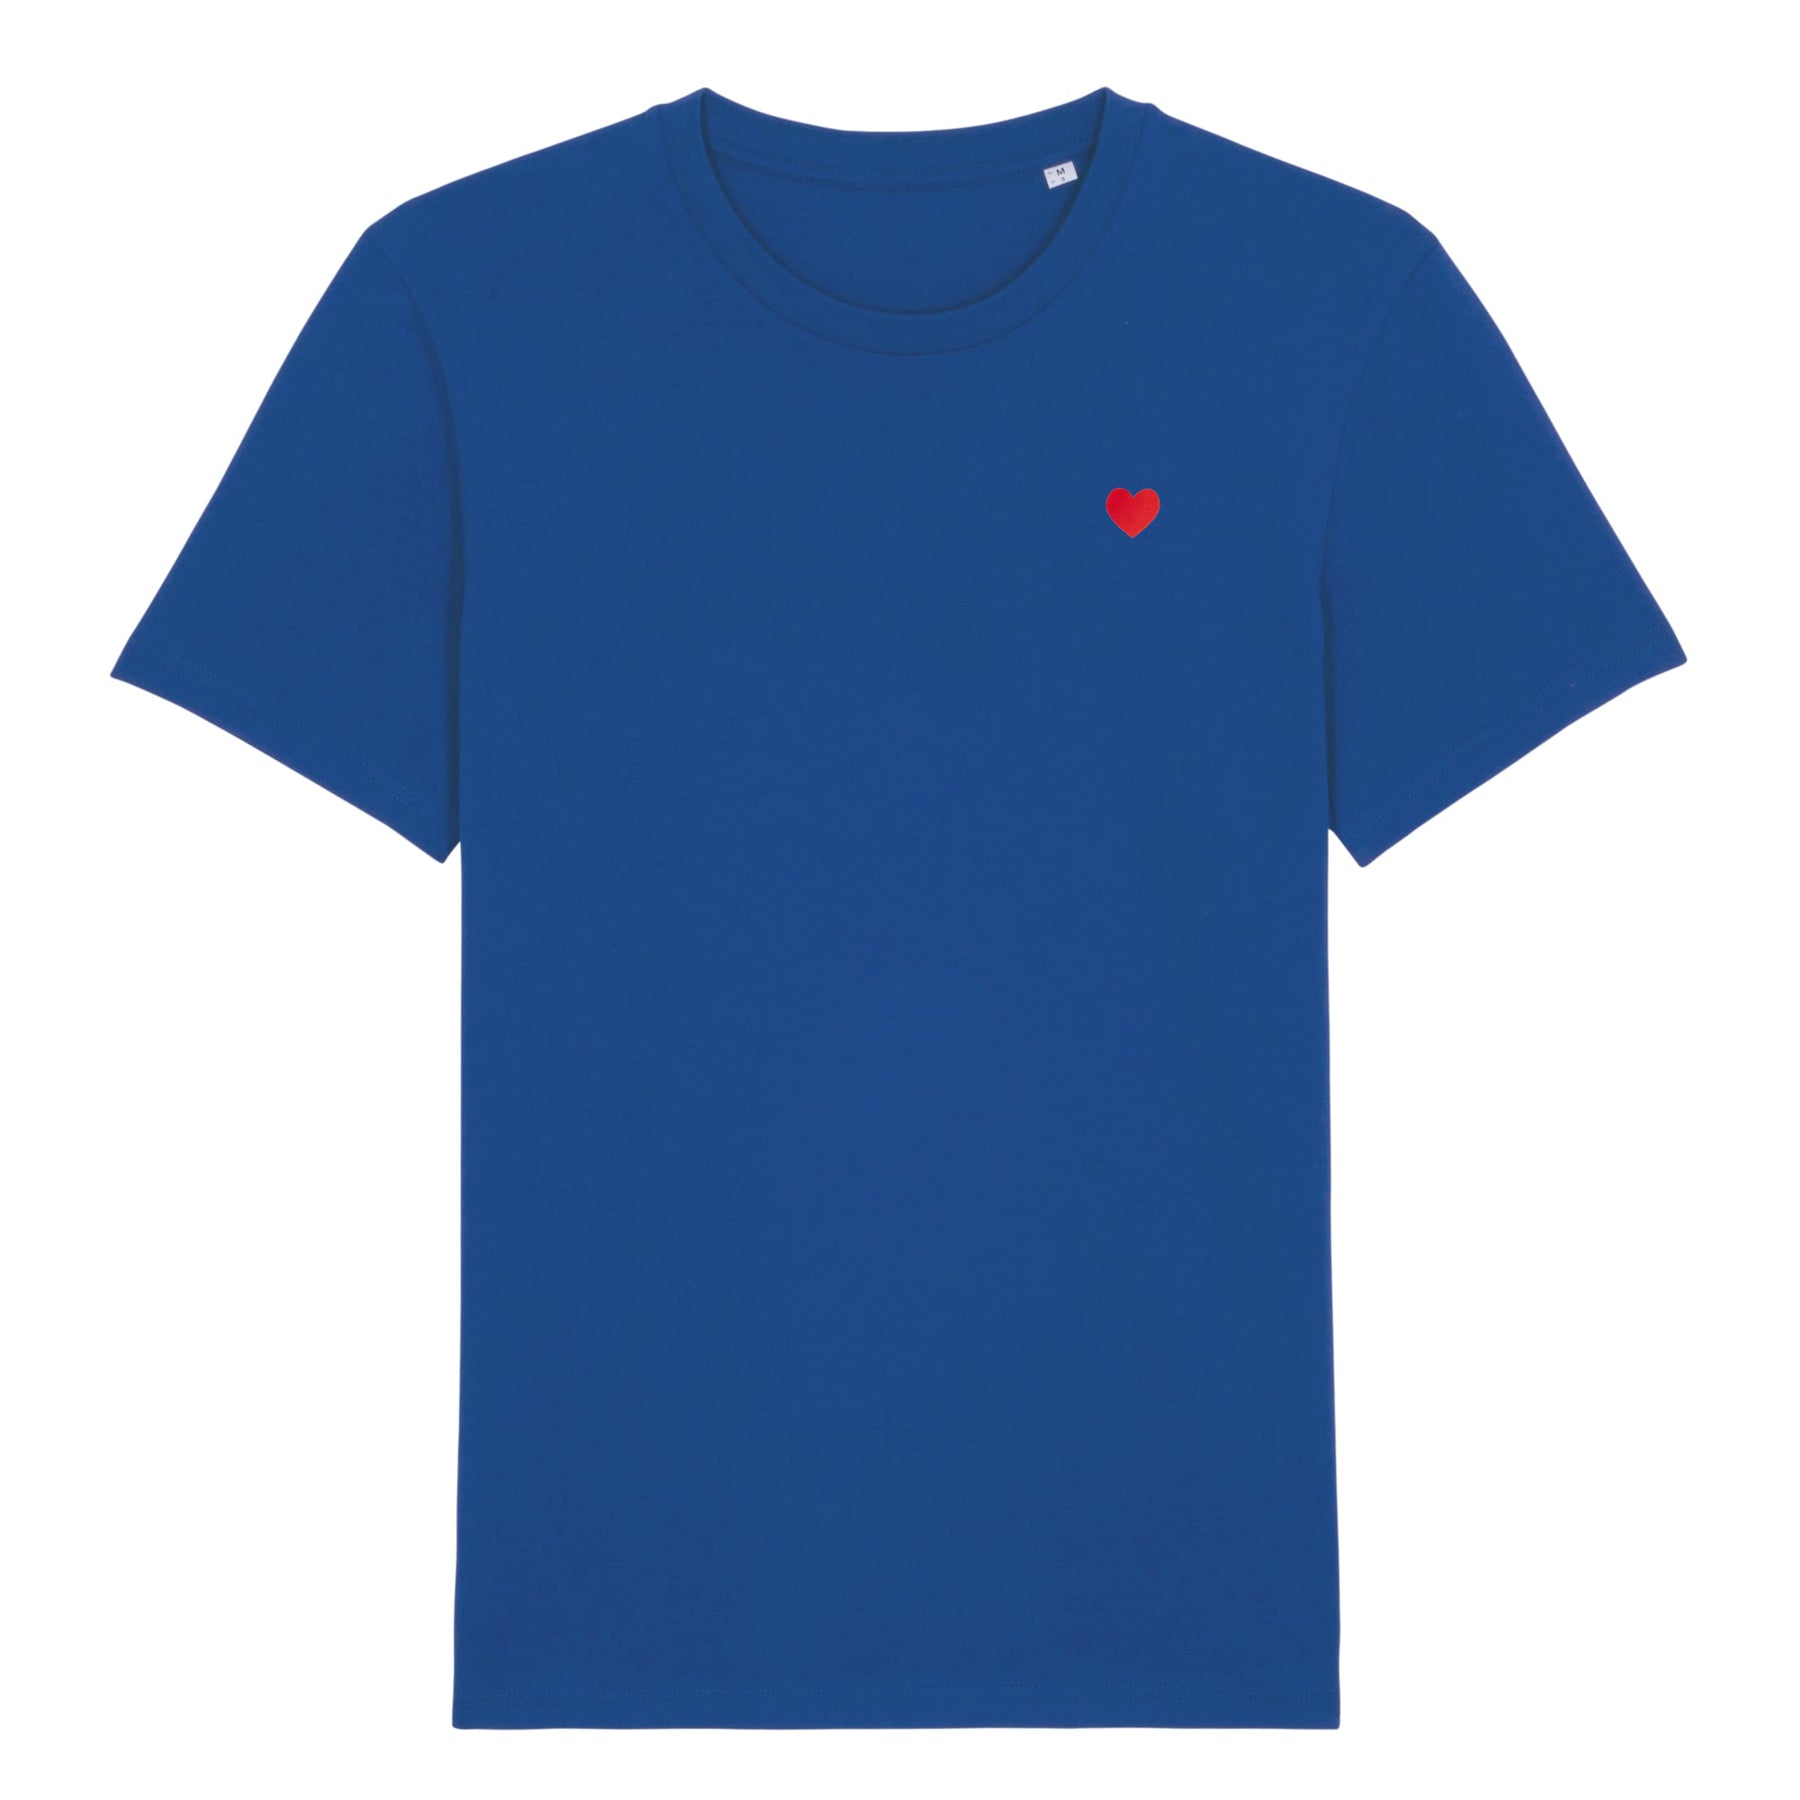 Majorelle Blue T-Shirt. Embroidered Heart